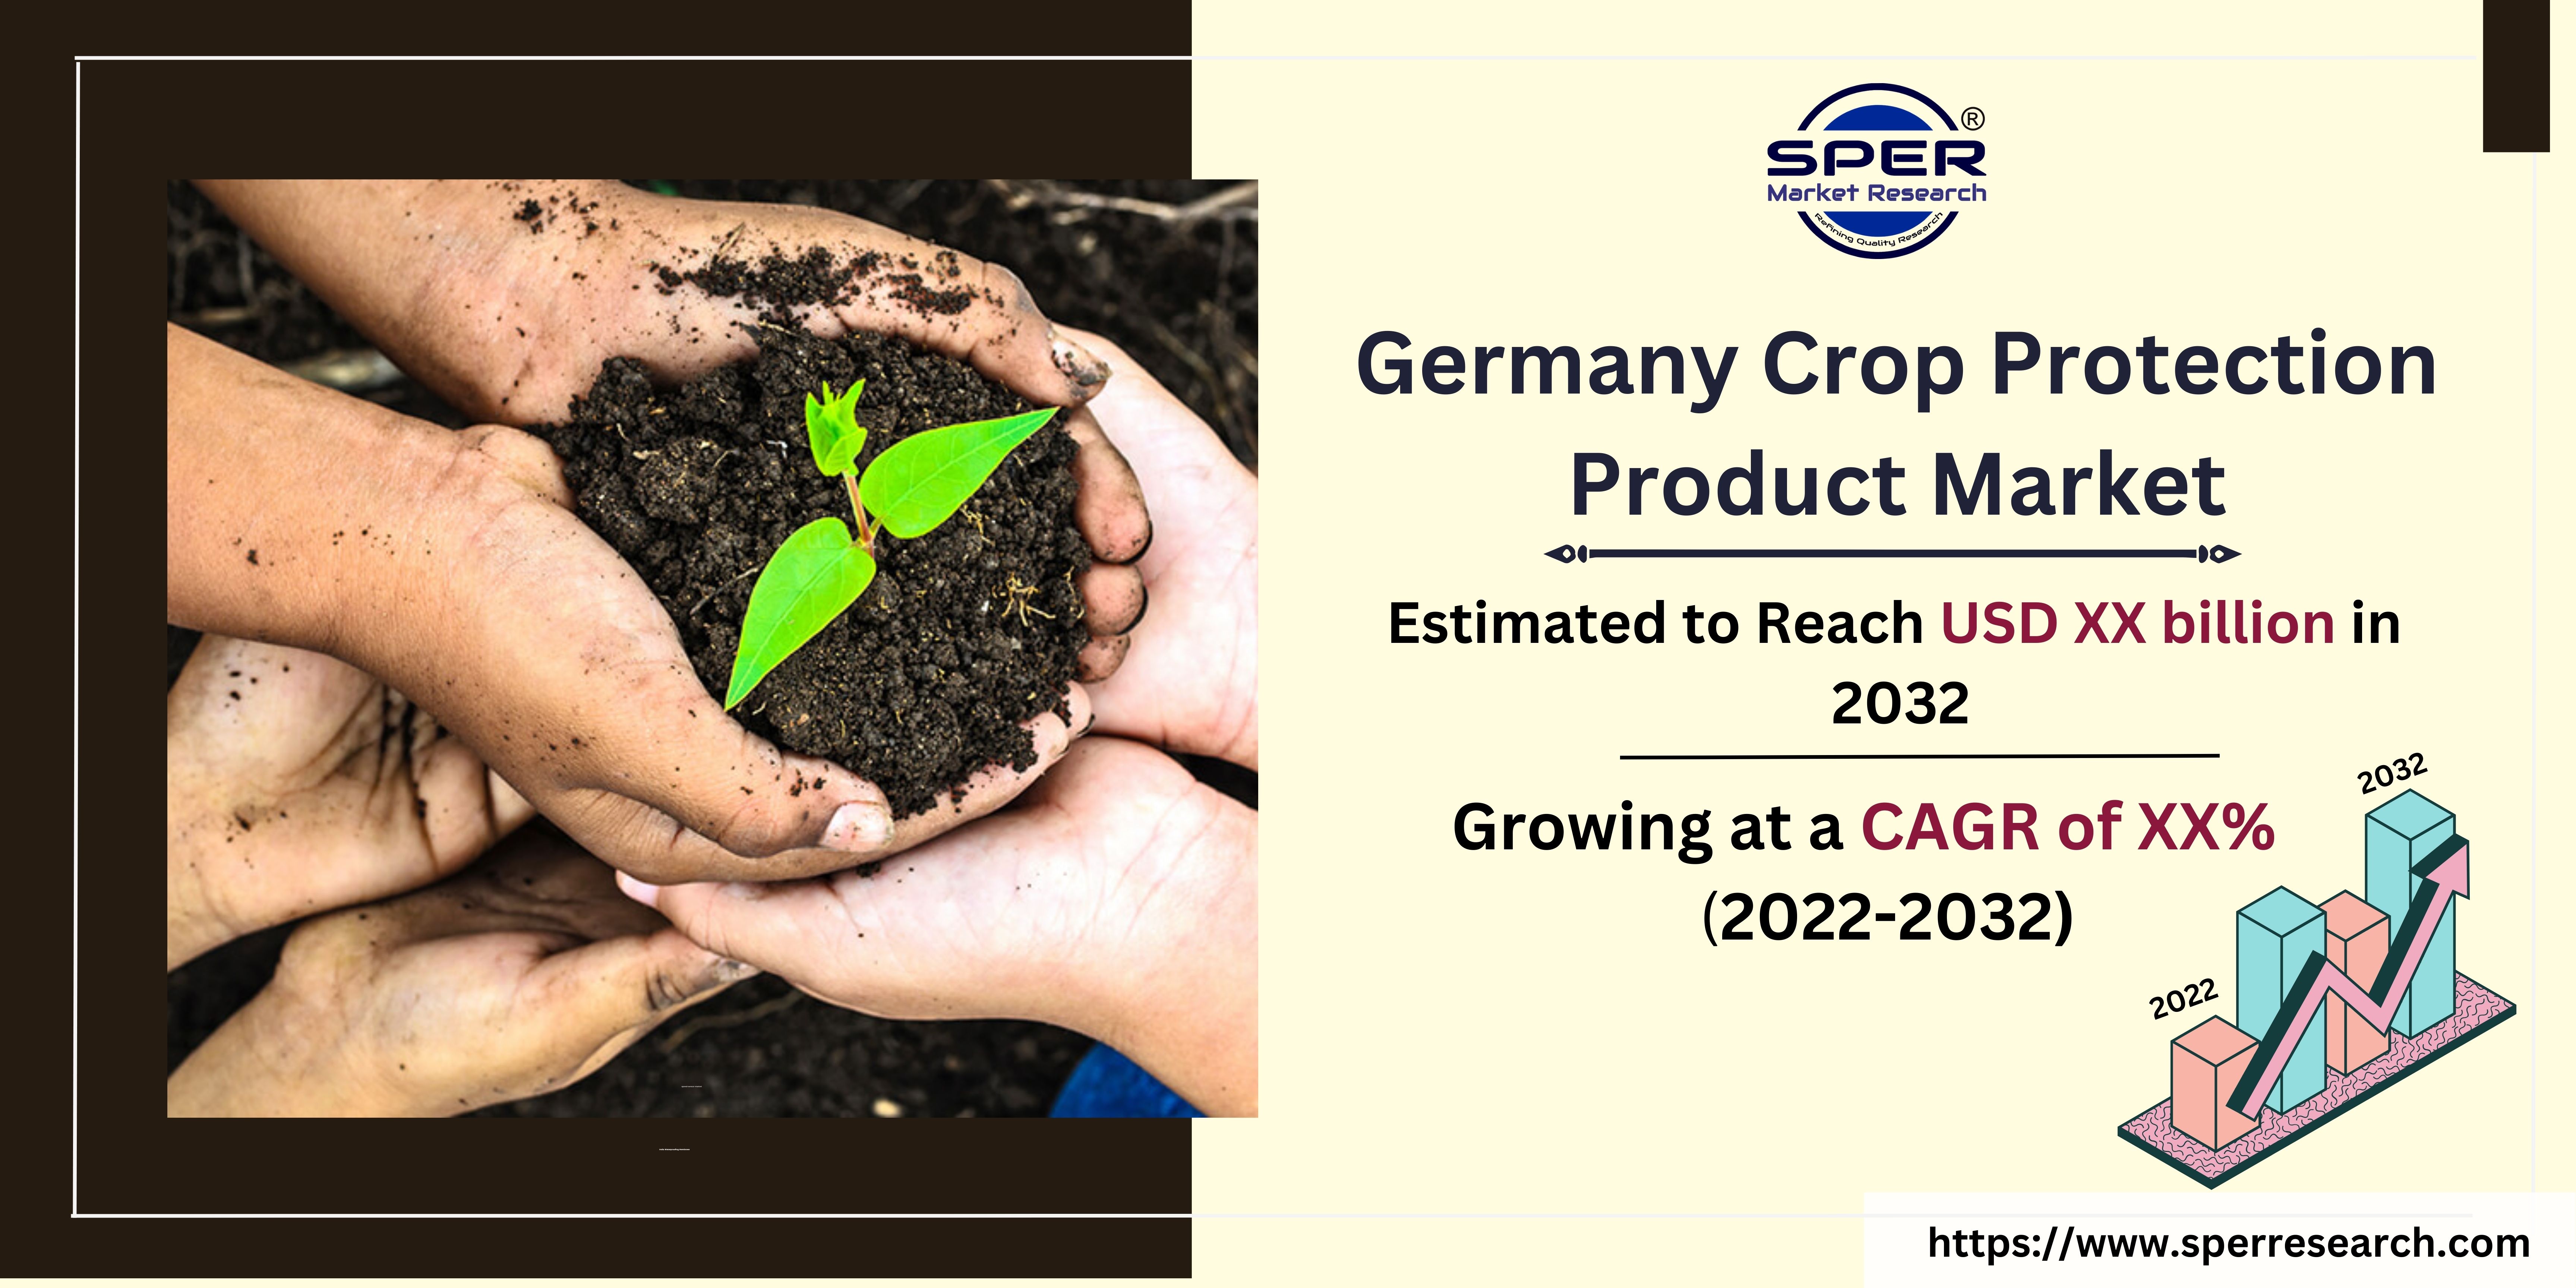 Germany Crop Protection Product Market